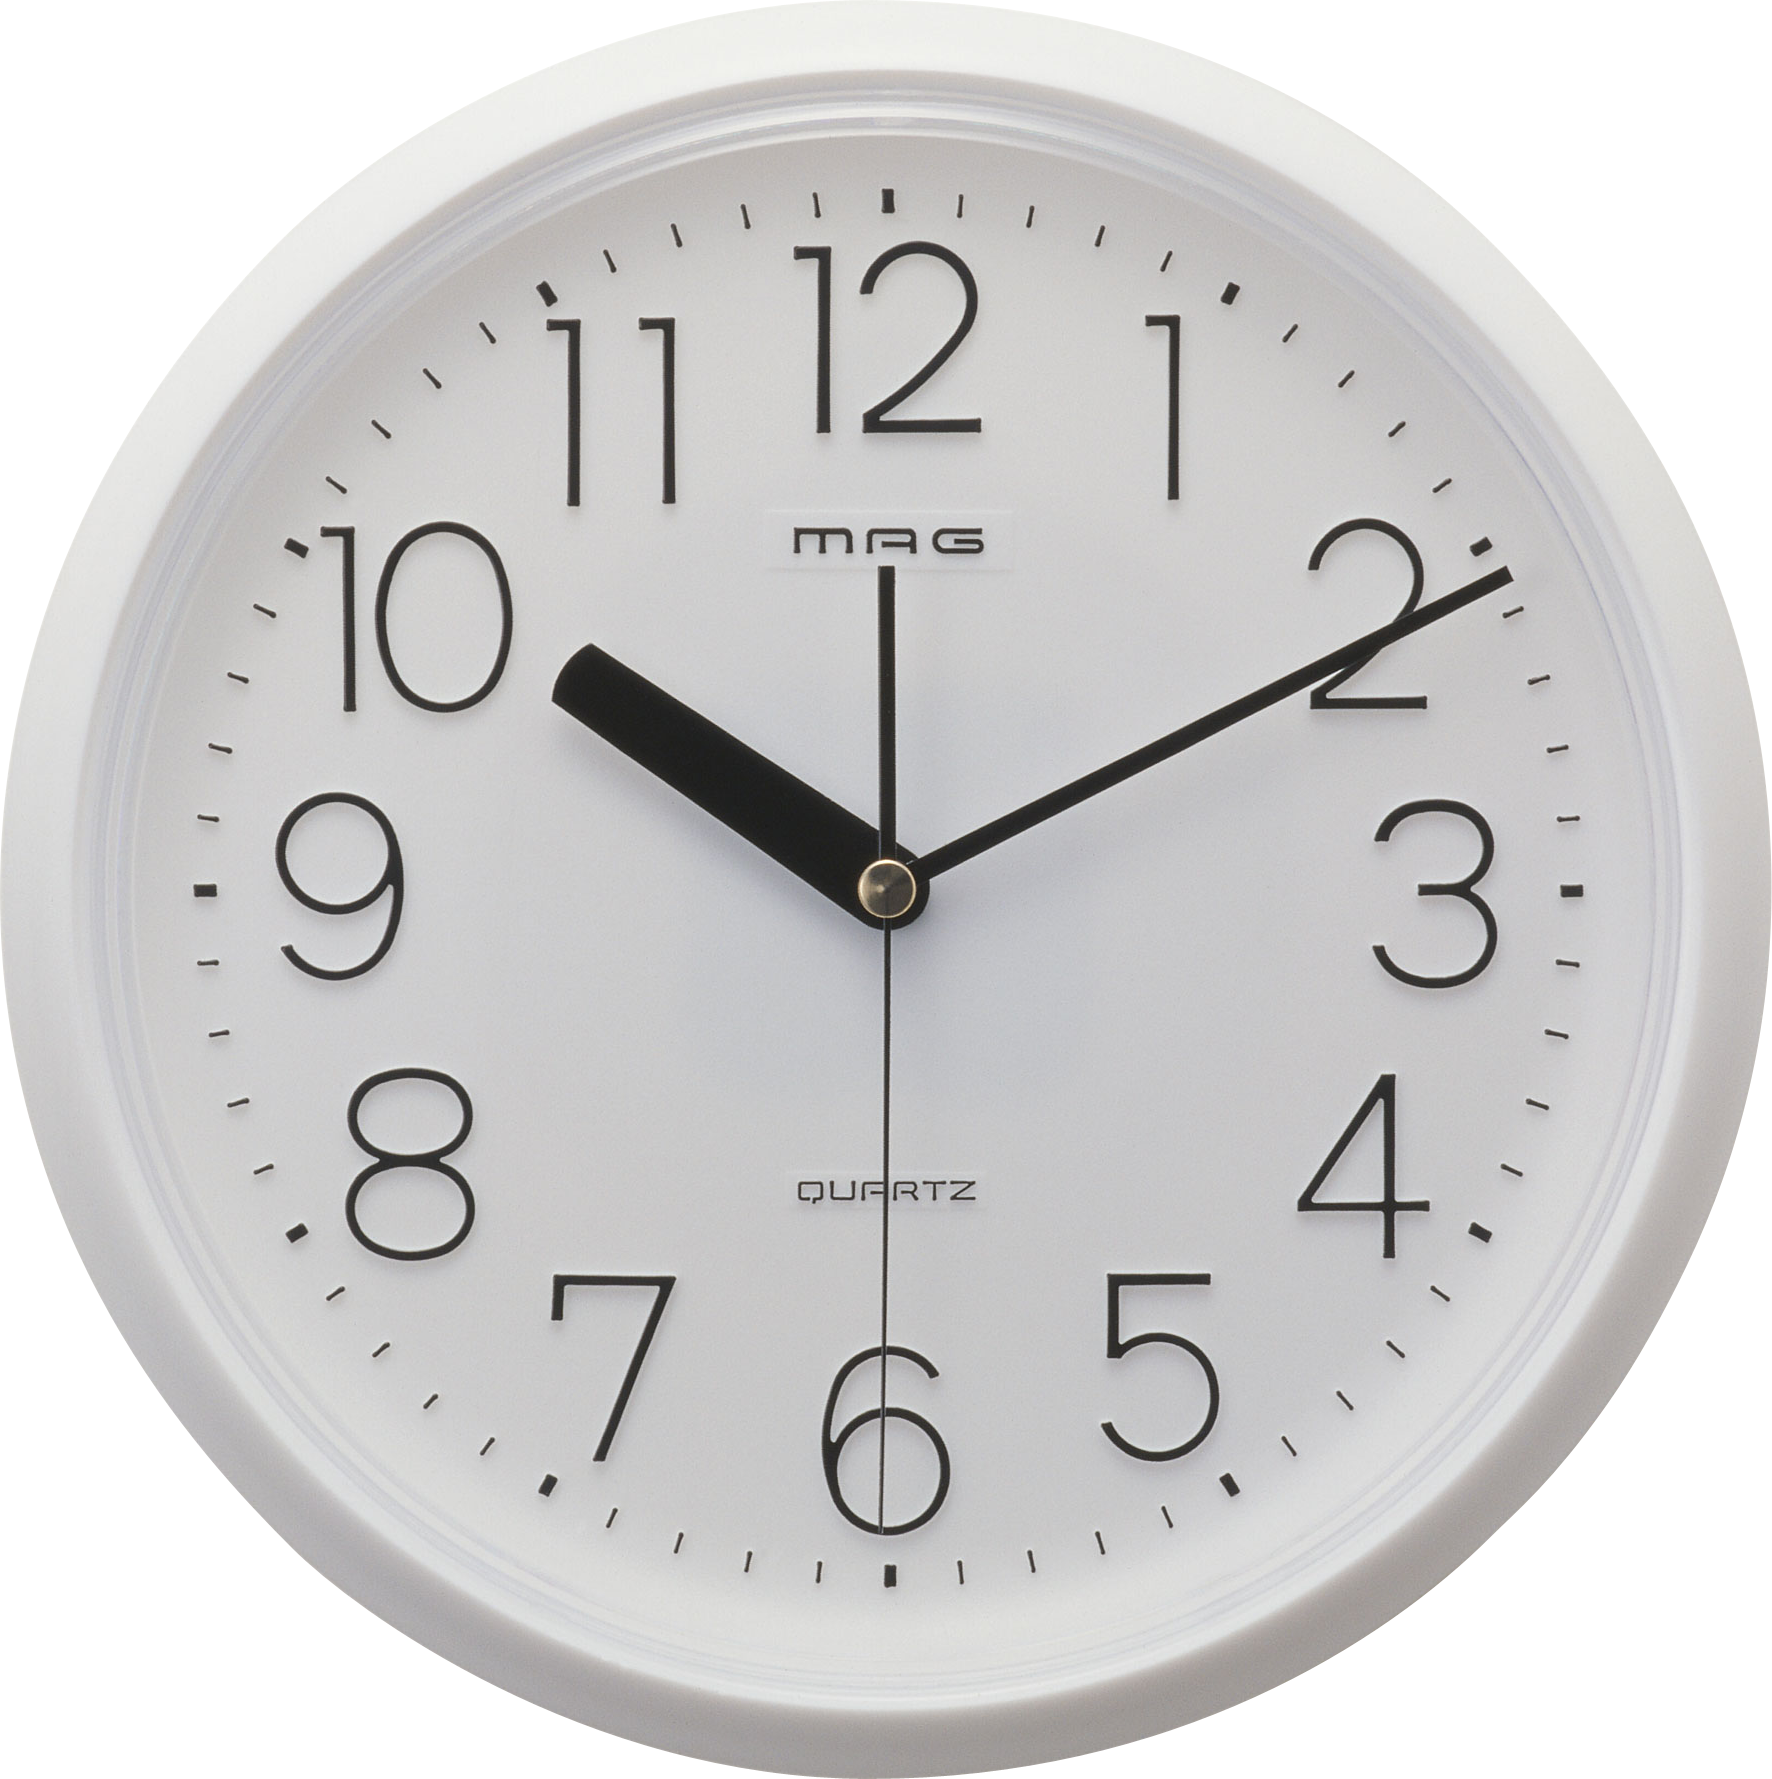 Clock PNG images, stopwatch PNG images, wristwatch PNG